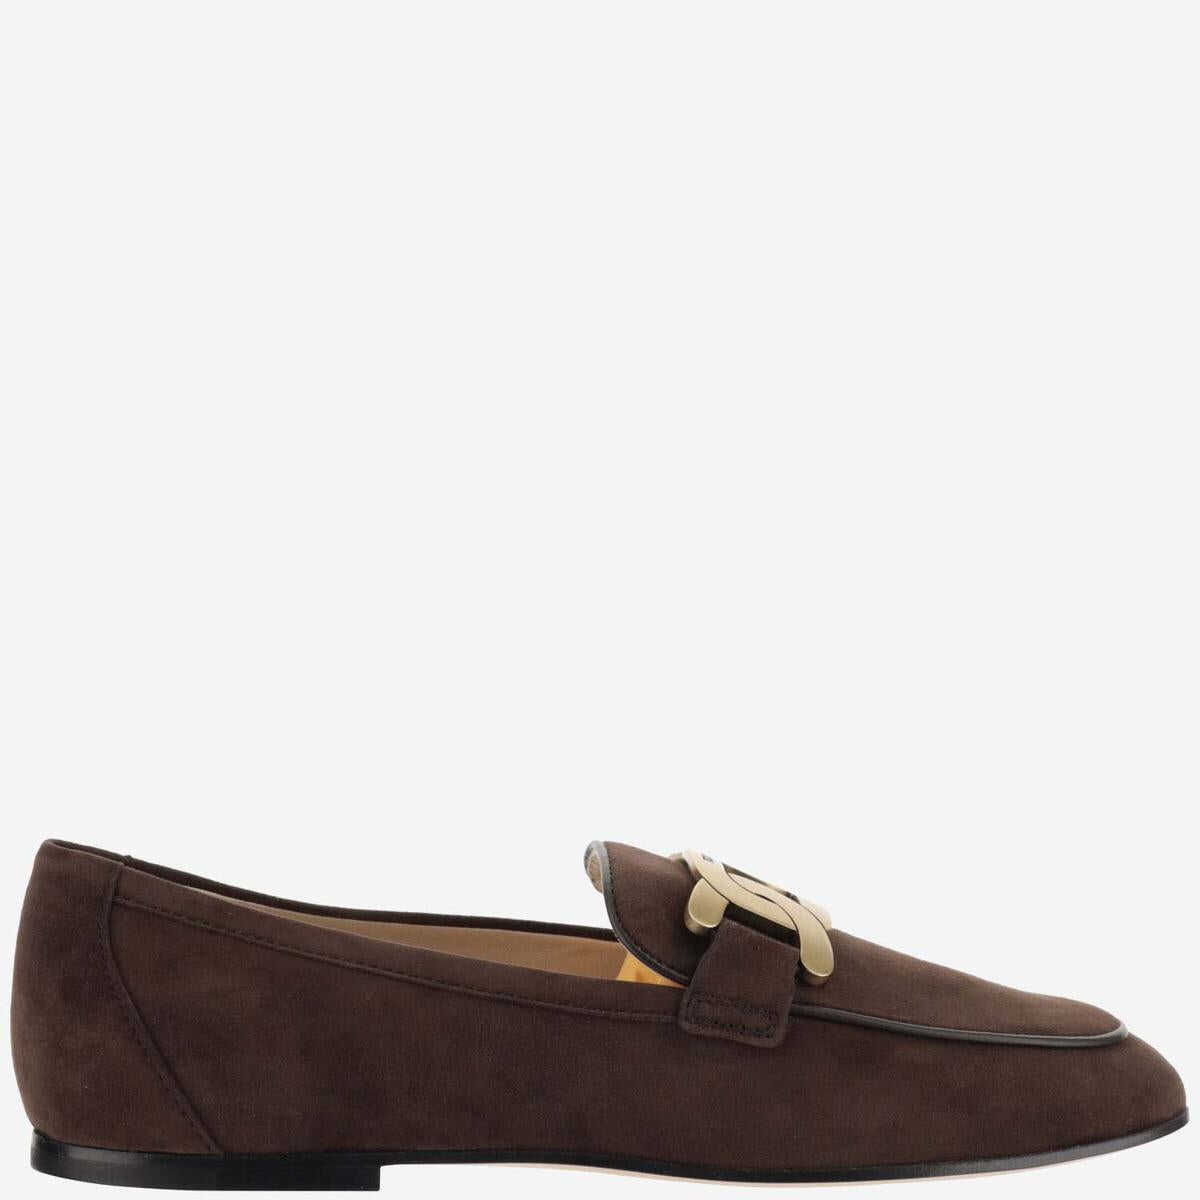 Poze TOD'S TOD'S KATE SUEDE LOAFER Marrone